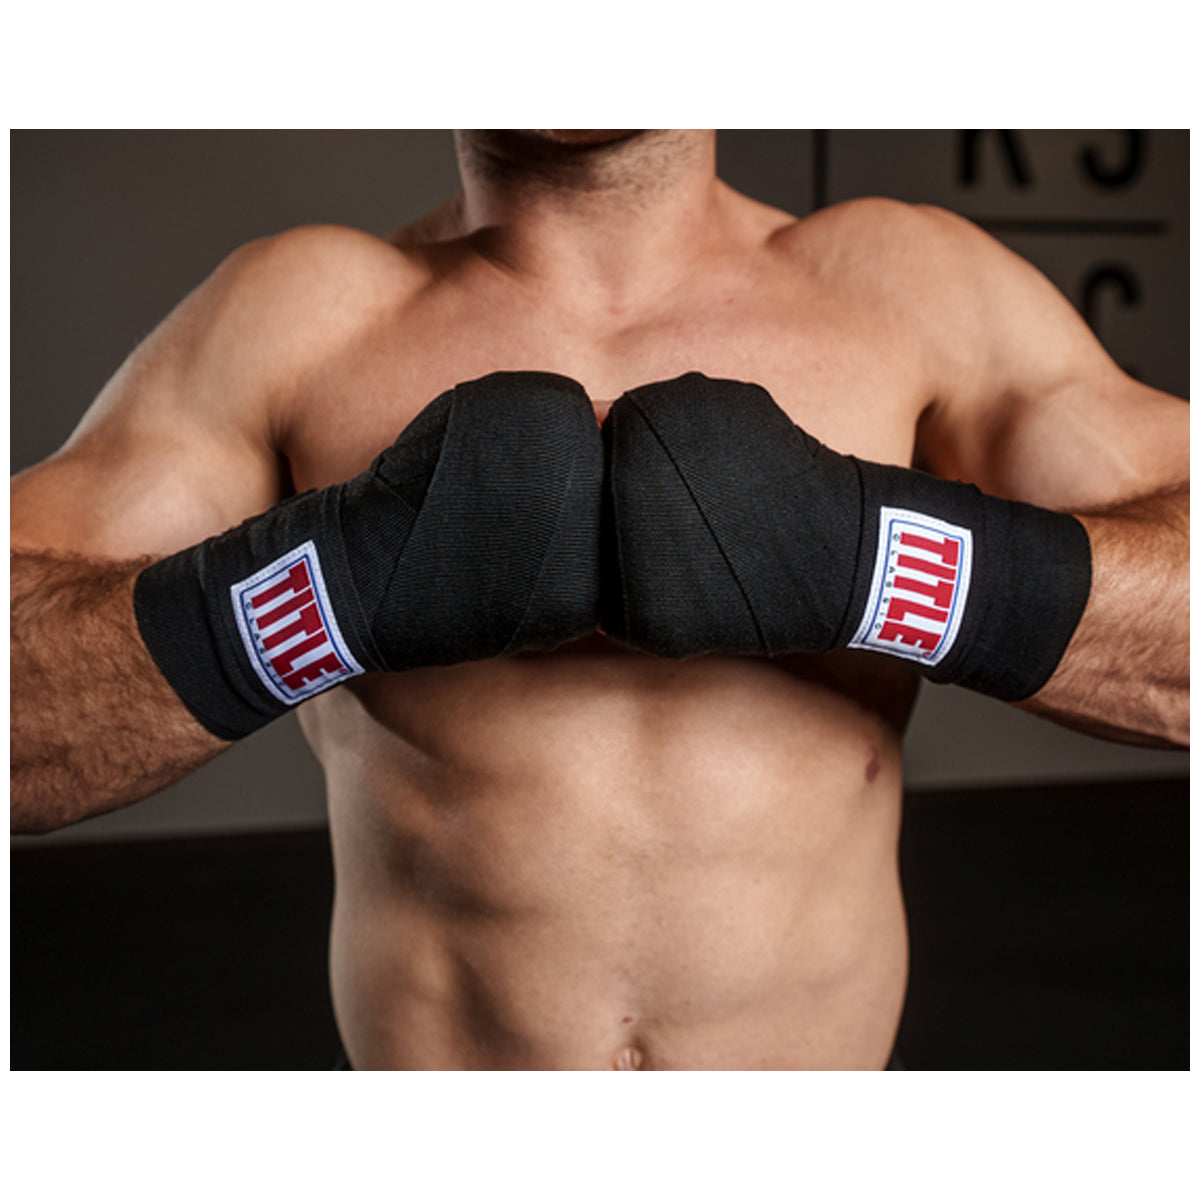 Title Boxing Classic Traditional Weave 180" Handwraps 2.0 Title Boxing